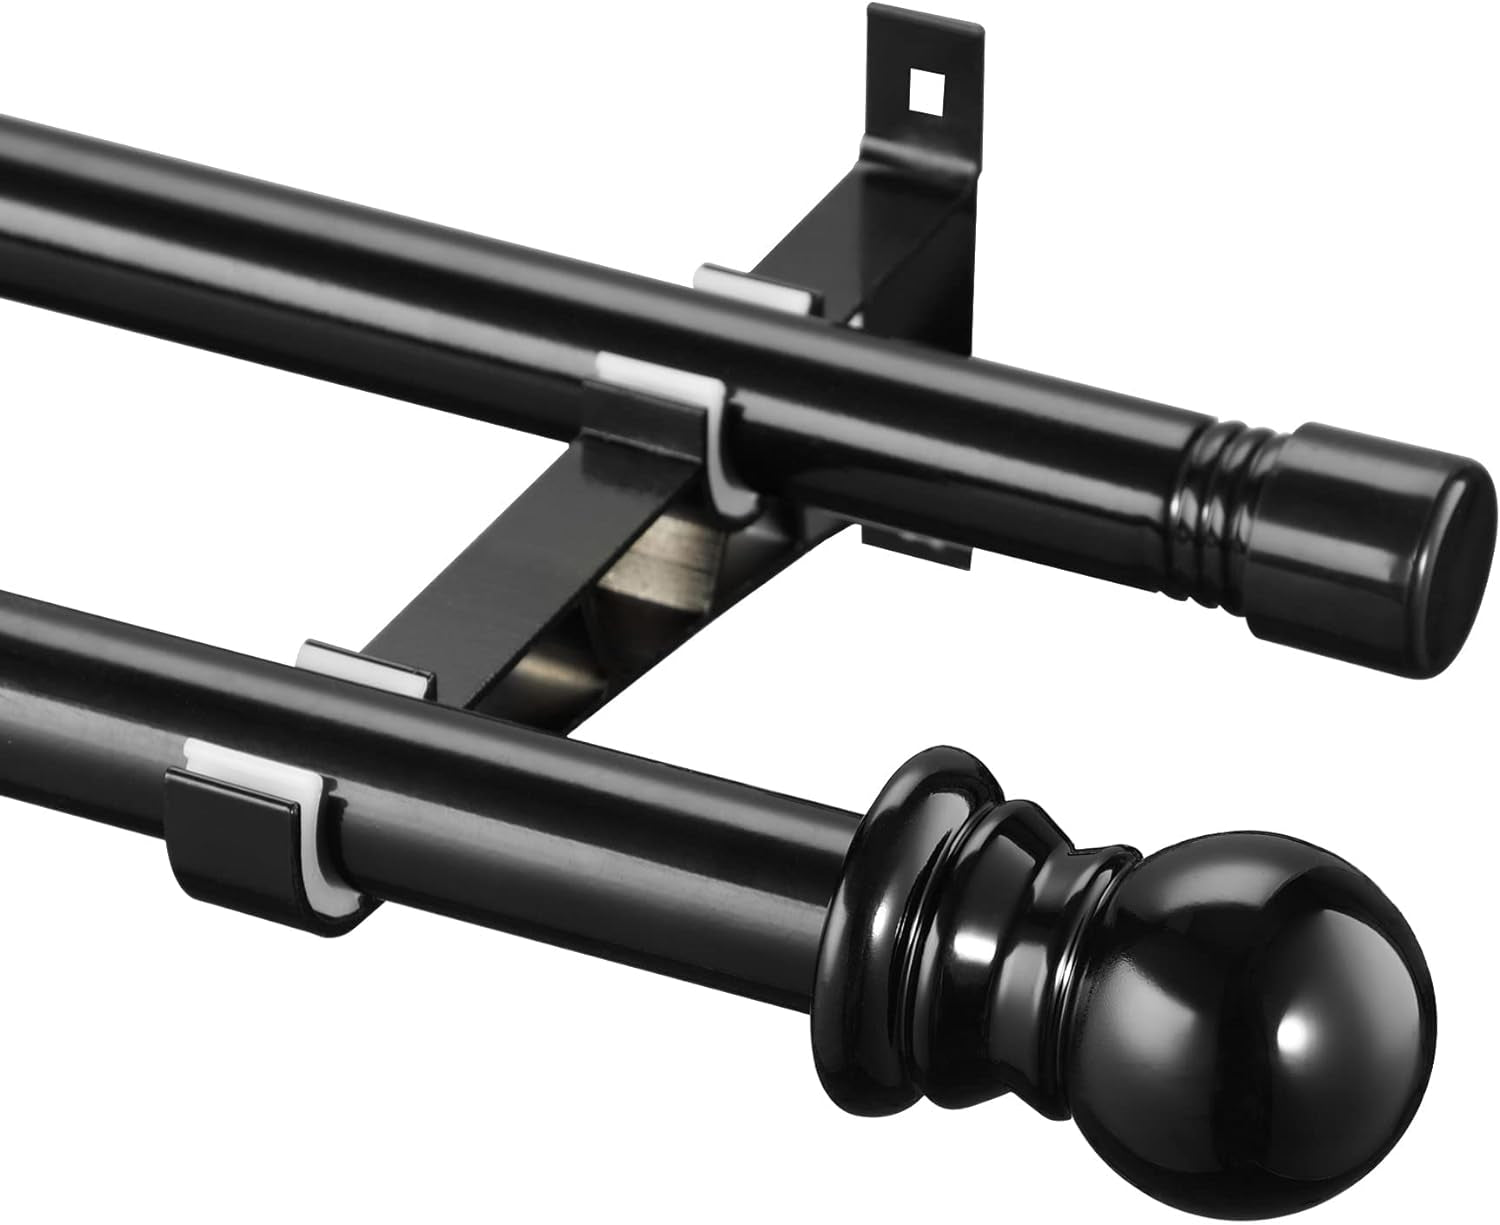 Double Curtain Rods for Windows 48 to 84 Inch - 1 Inch Heavy Duty Double Window Rods - Adjustable Decorative Black Dual Curtain Rod for Sliding Glass Door, Patio, Bedroom, Kitchen, Bathroom